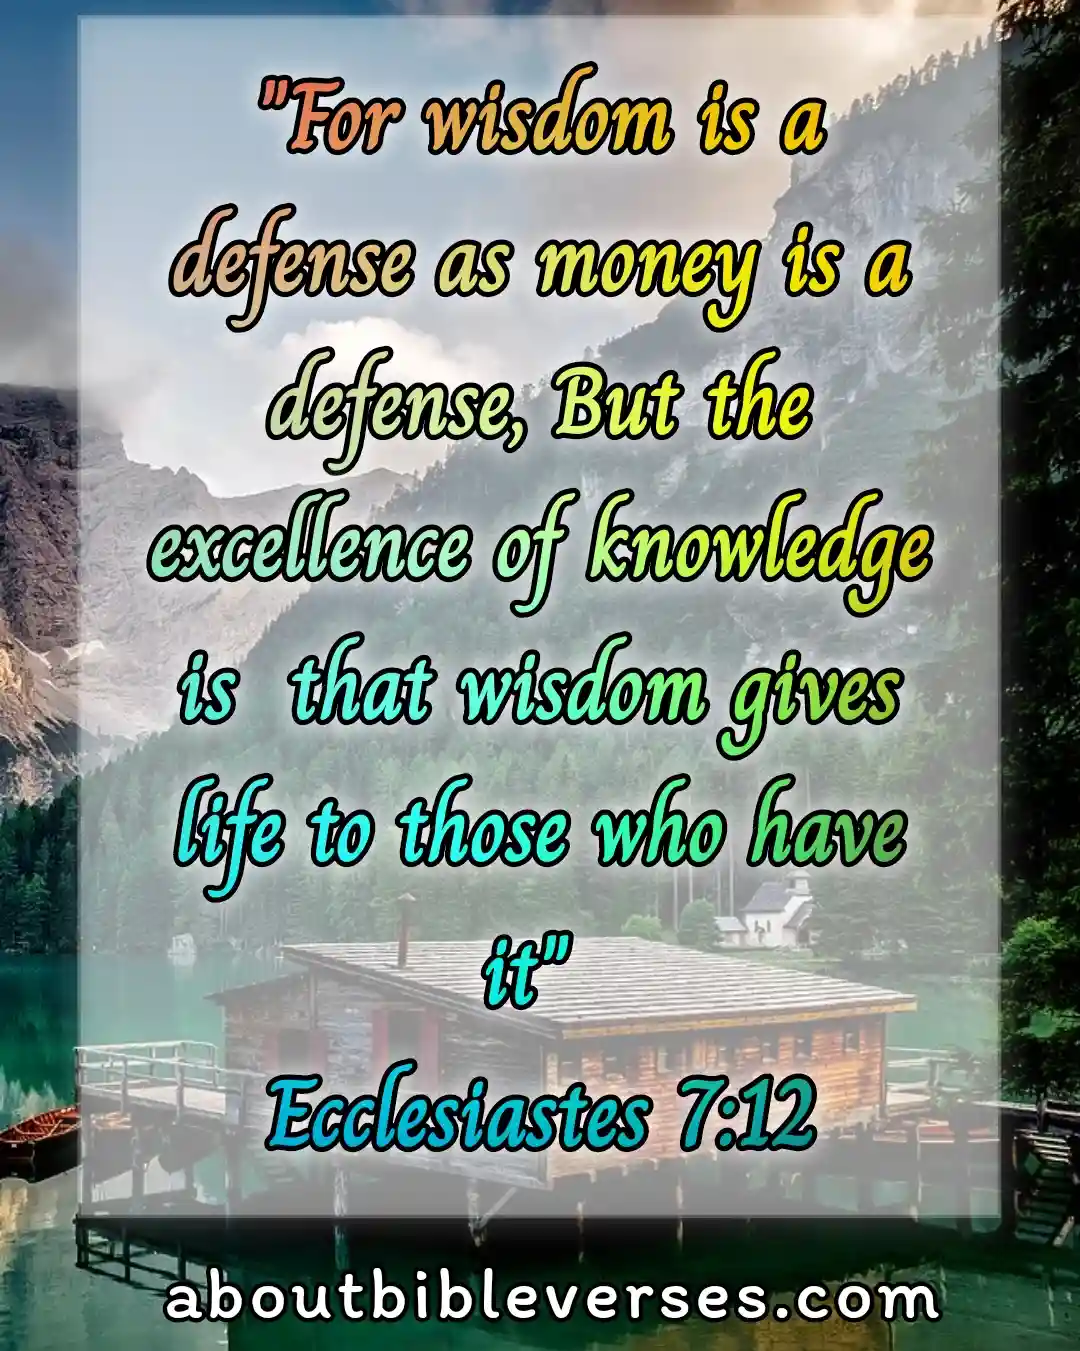 Bible Verses About Age And Wisdom (Ecclesiastes 7:12)